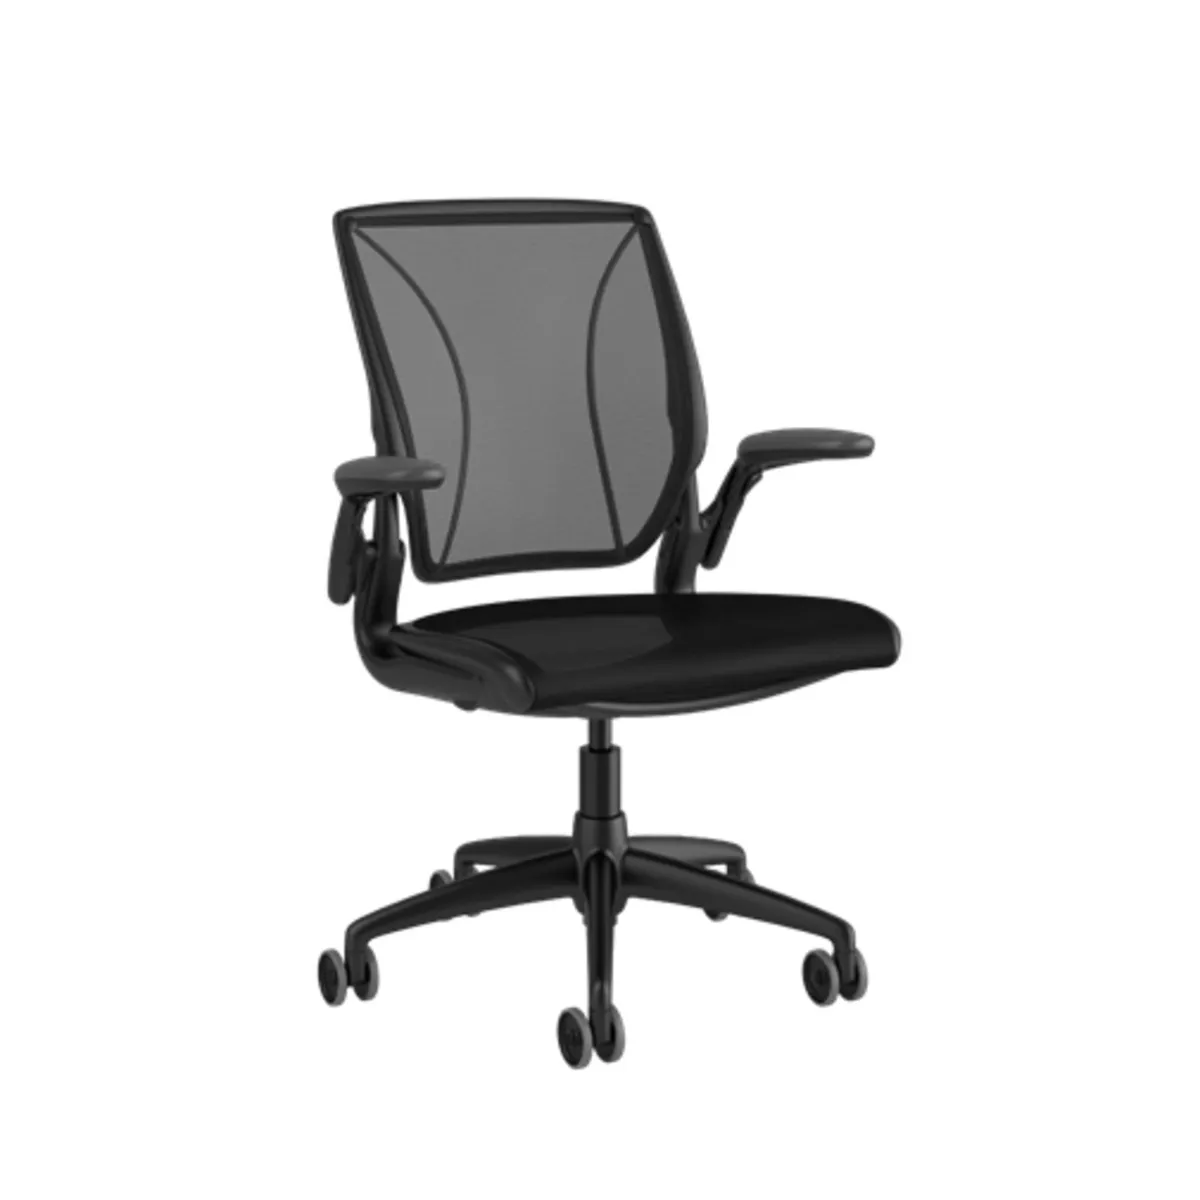 Humanscale world task chairs brand new. - Image 1